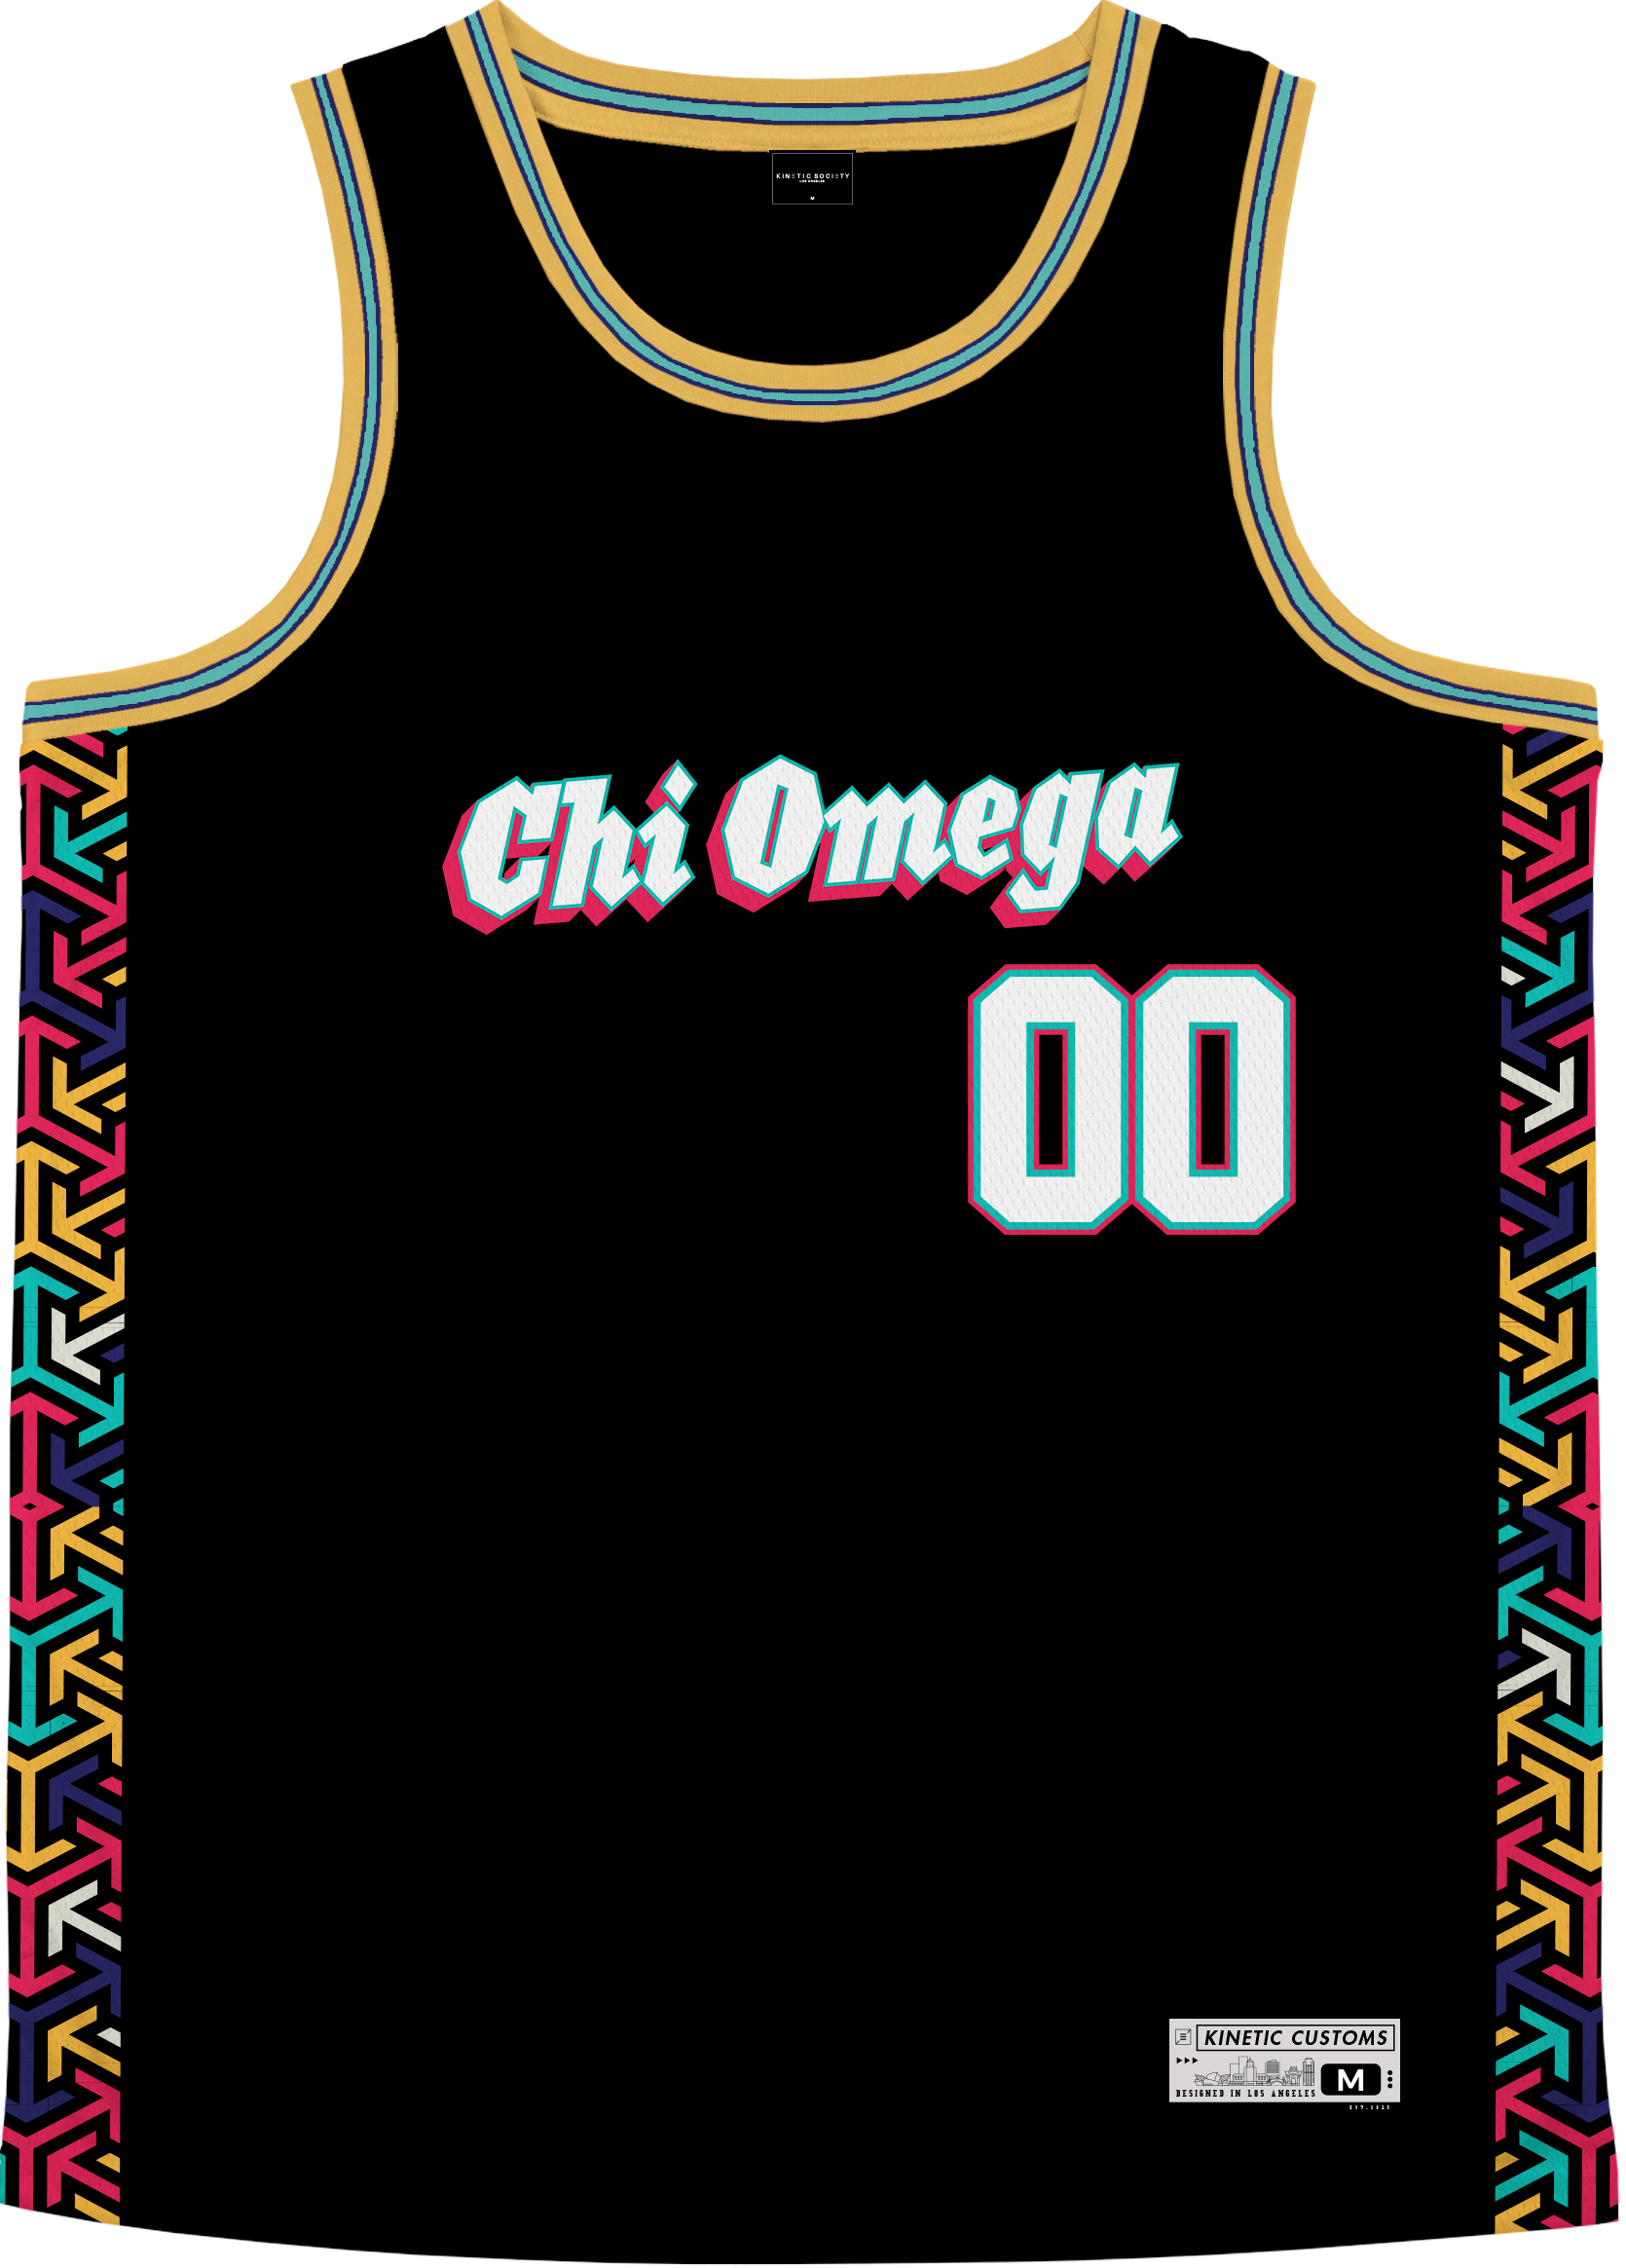 CHI OMEGA - Cubic Arrows Basketball Jersey